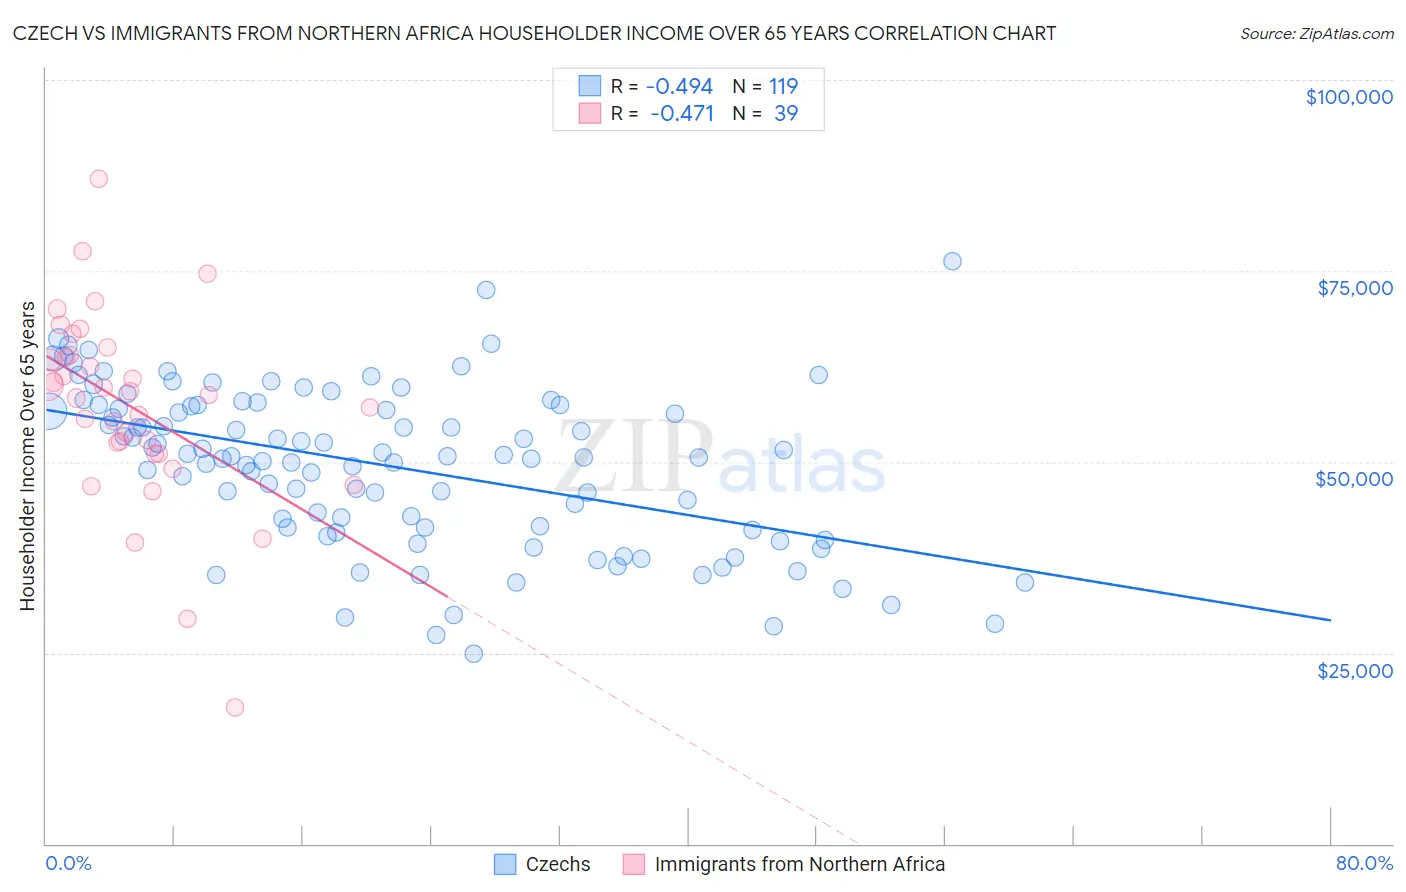 Czech vs Immigrants from Northern Africa Householder Income Over 65 years